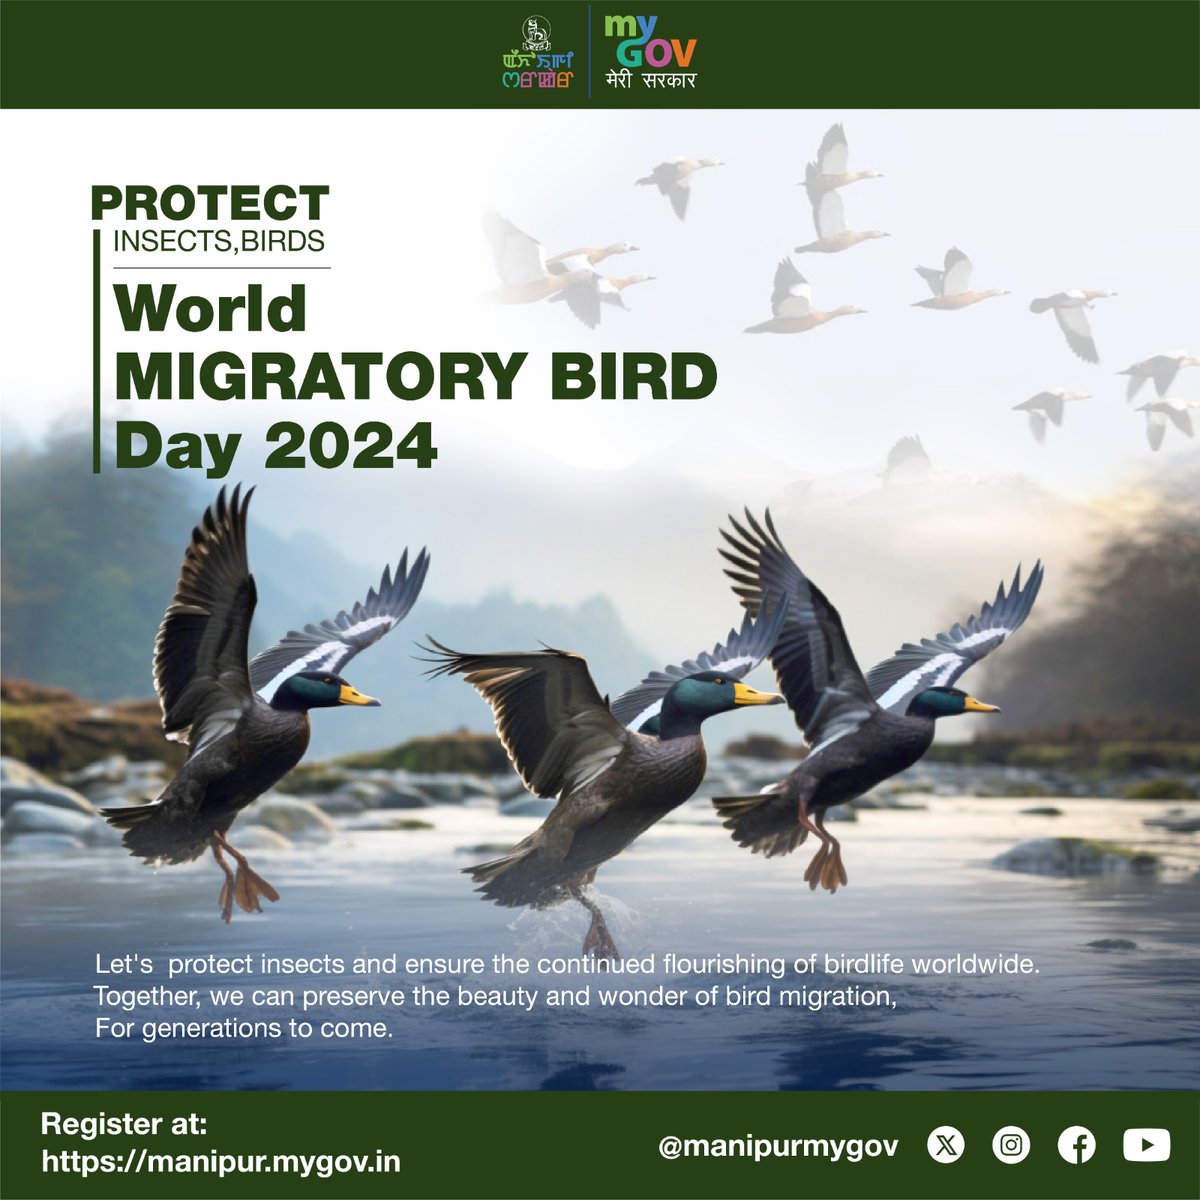 Let's pledge to take action, whether it's preserving habitats, reducing pesticide use, or supporting conservation efforts. Together, we can ensure that the skies remain filled with the sights and sounds of migratory birds for generations to come. Happy World Migratory Bird Day!